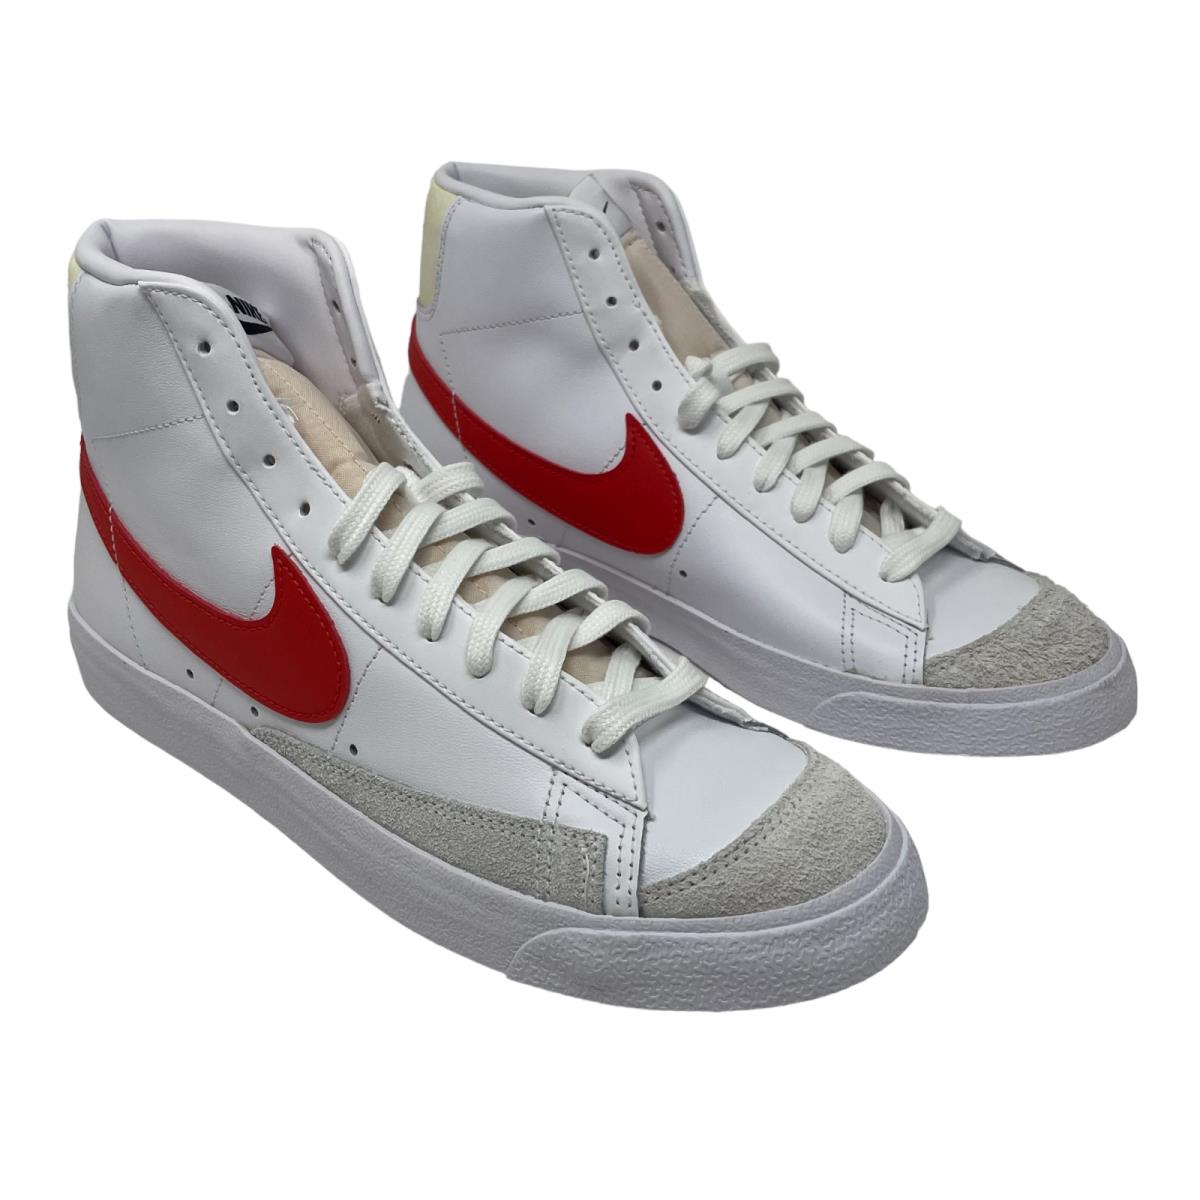 Nike Blazer Mid `77 Vntg White/red Sneakers Size 10.5 M 12 F